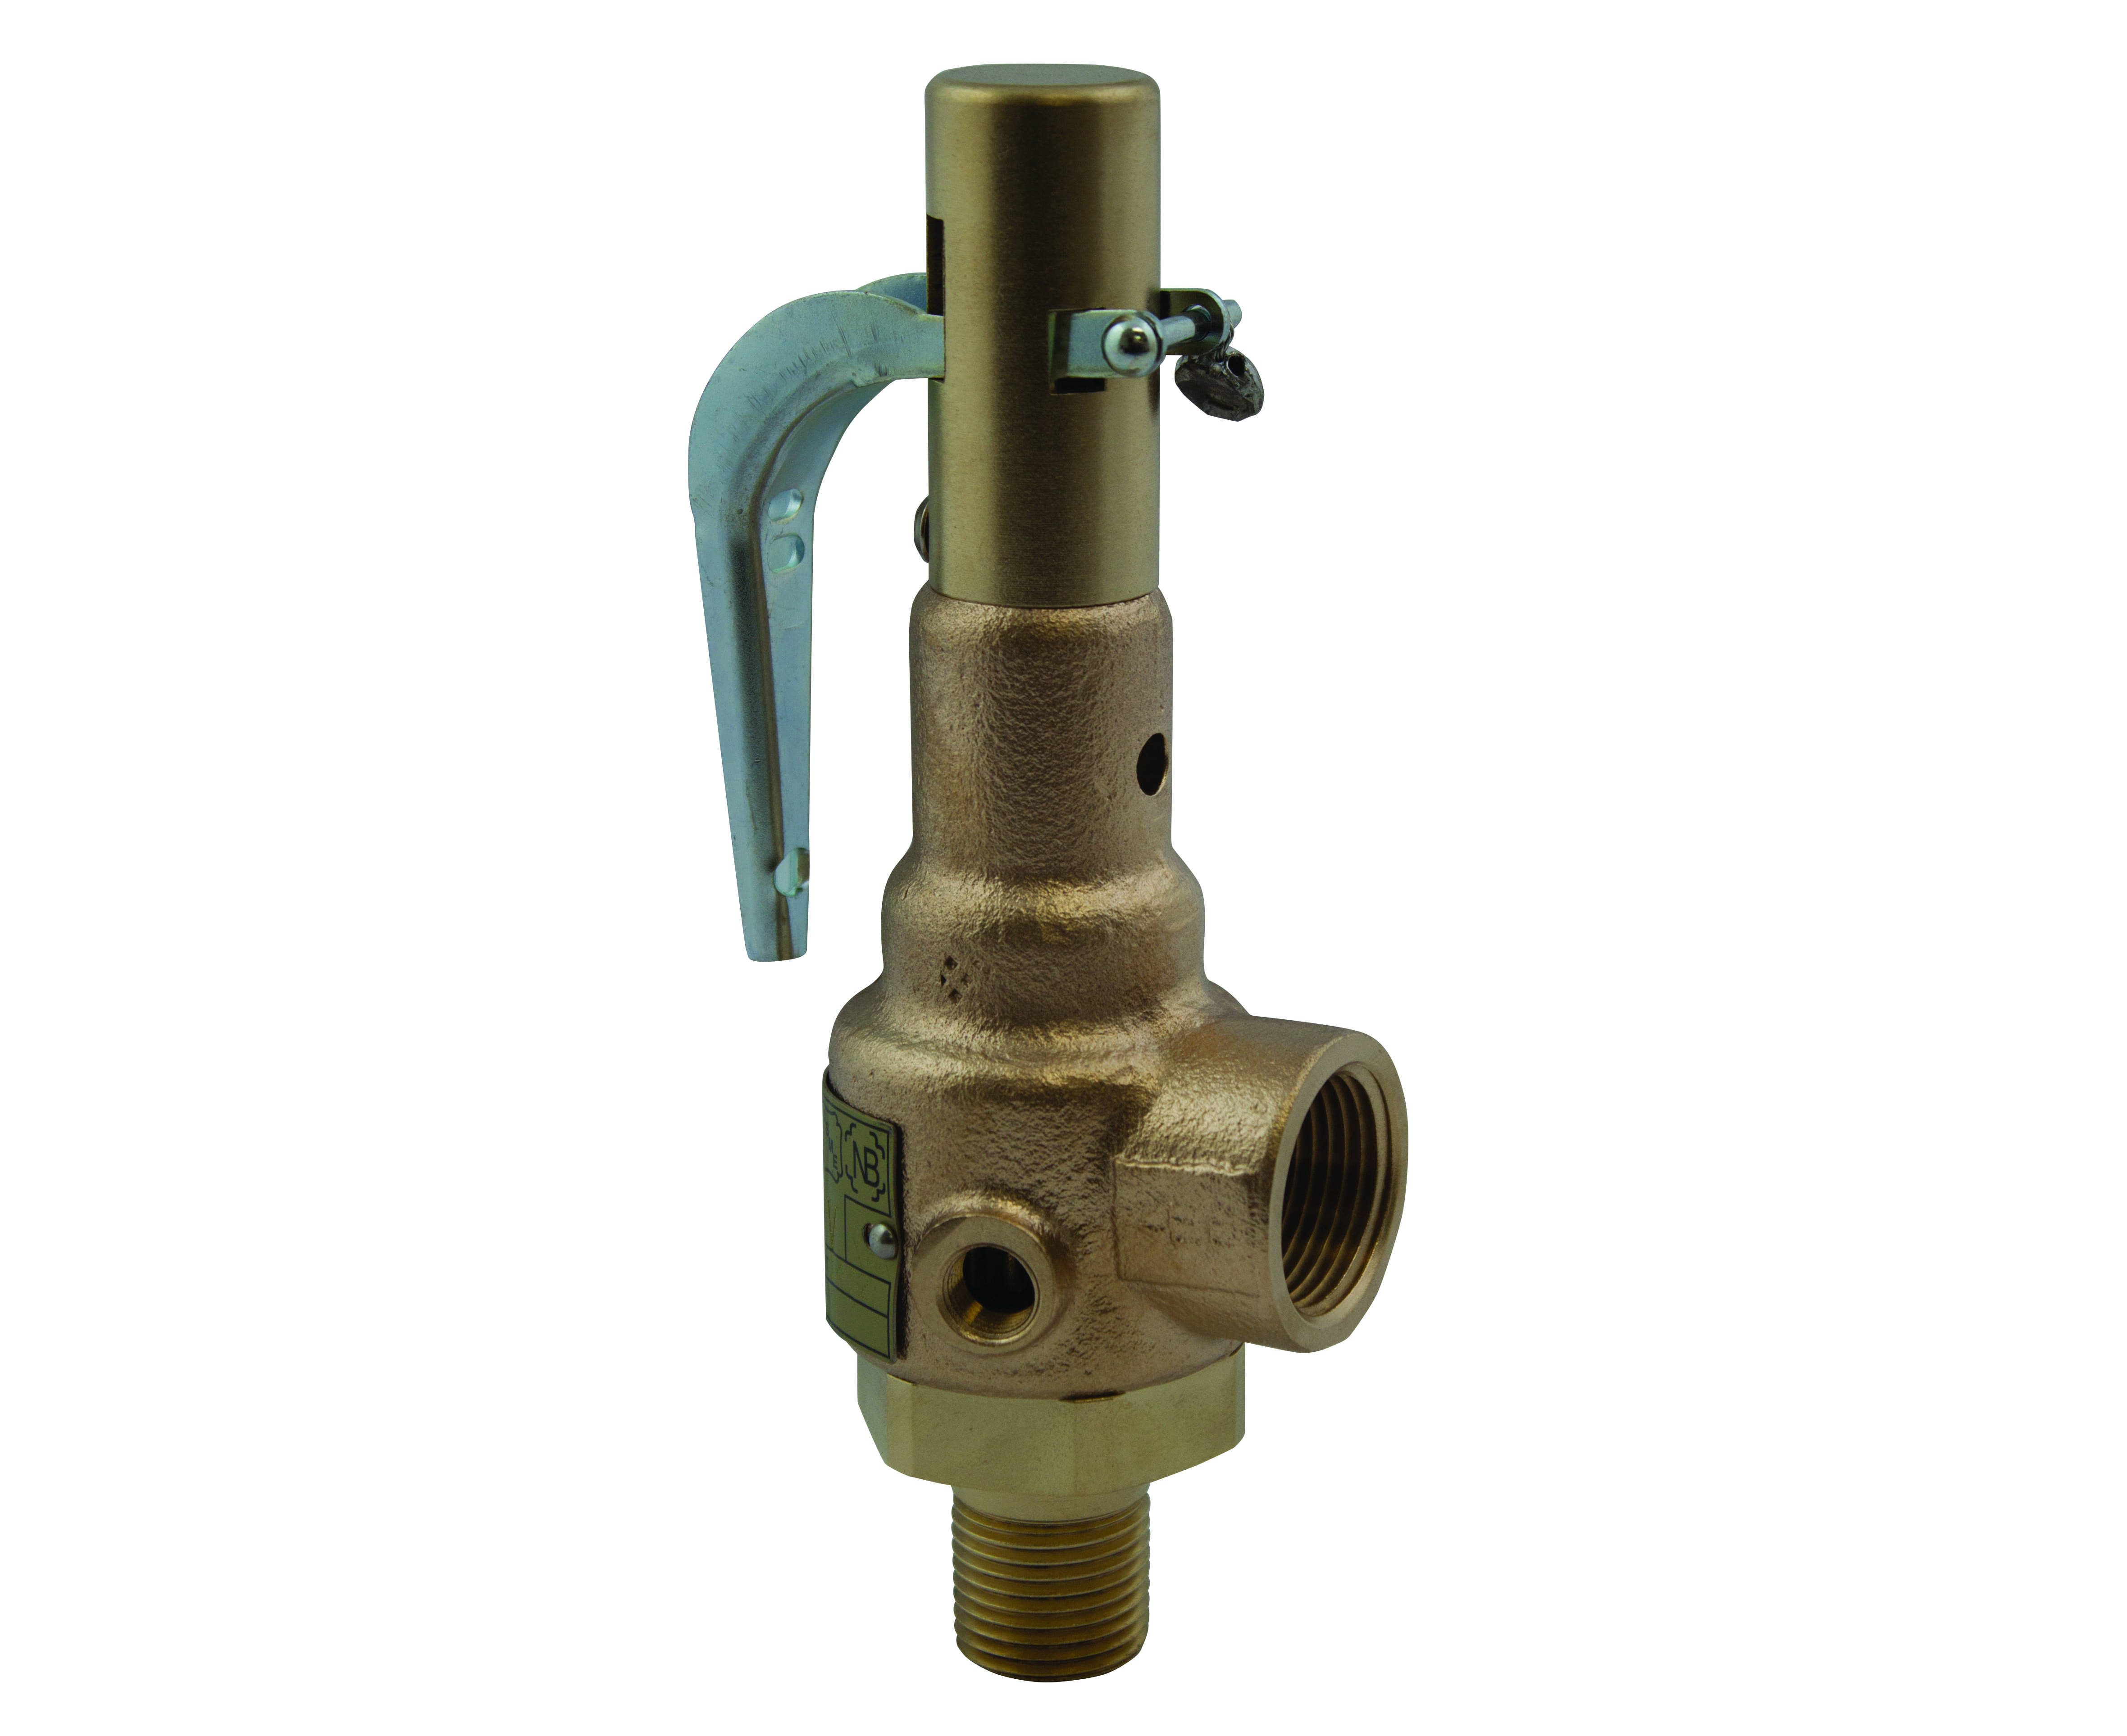 Preview image for Apollo ASME Sec I Steam Bronze Safety Relief Valves with Brass Trim, Teflon Seat, CE/PED Compliant, 1" (MNPT x FNPT)